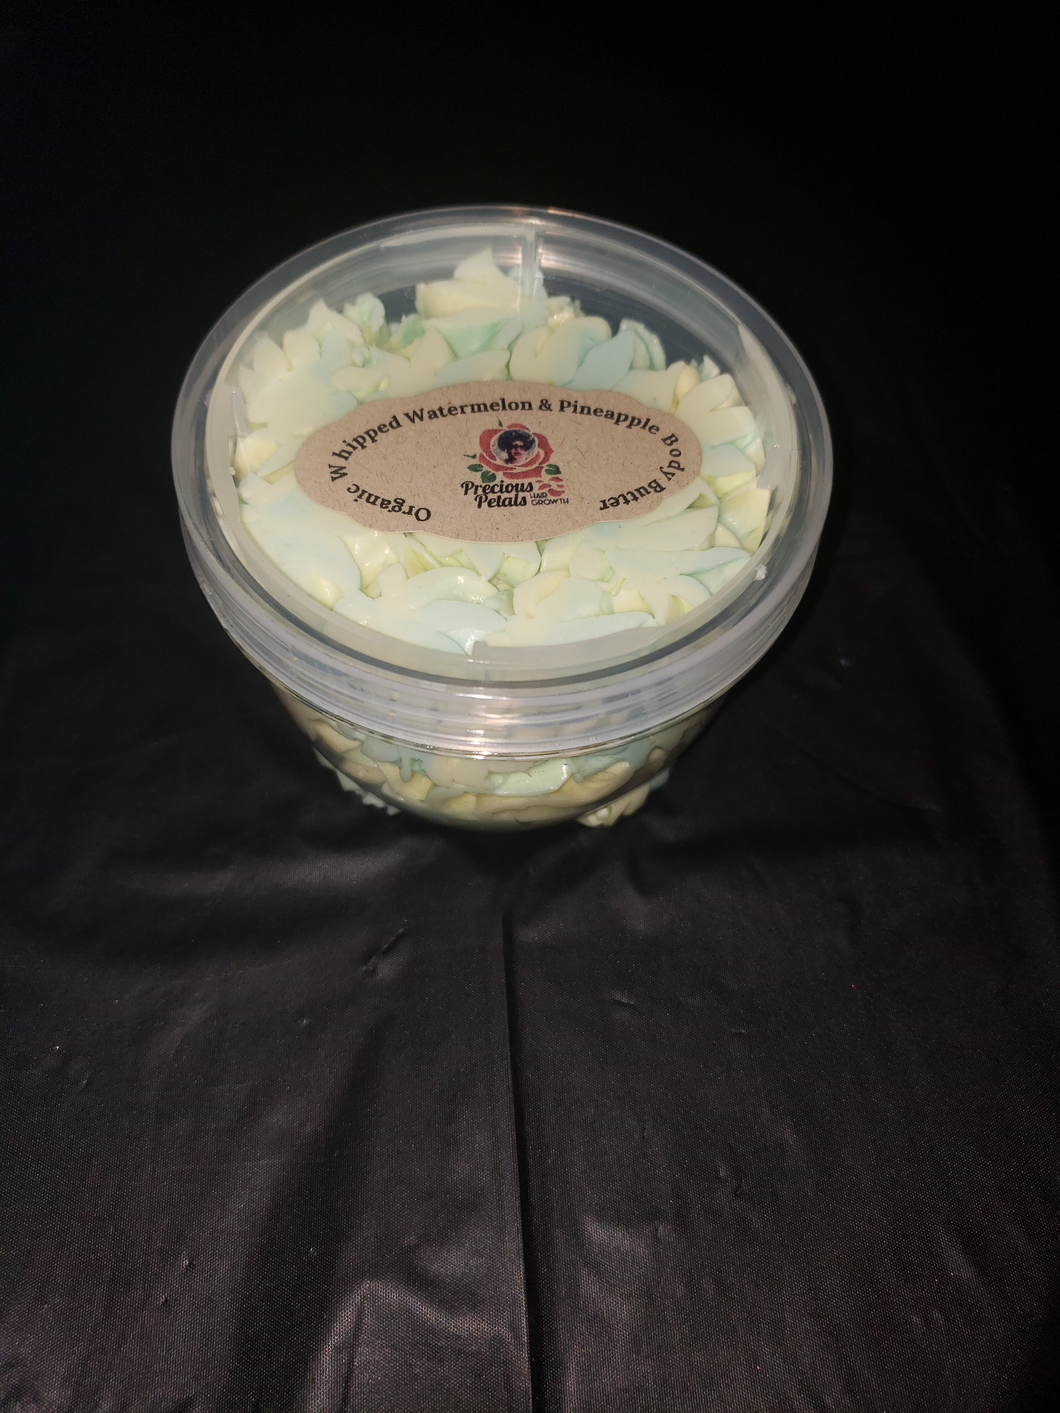 BODY BUTTER***Whipped Watermelon & Pineapple Body Butter